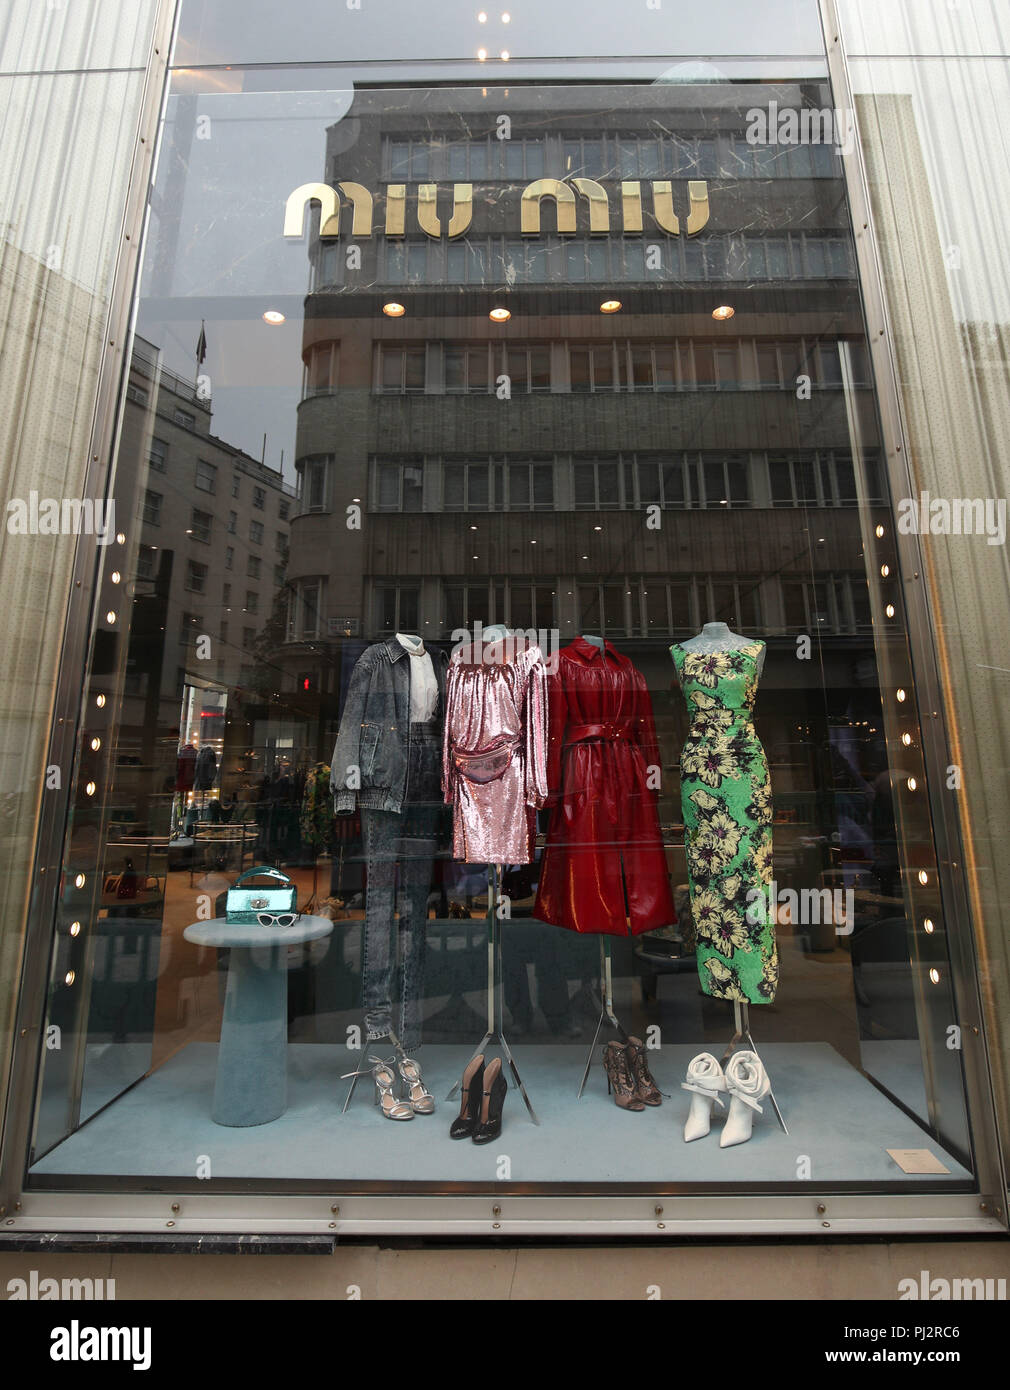 The Miu Miu store on New Bond Street, London. PRESS ASSOCIATION Photo. Picture date: Wednesday August 22, 2018. Photo credit should read: Yui Mok/PA Wire Stock Photo